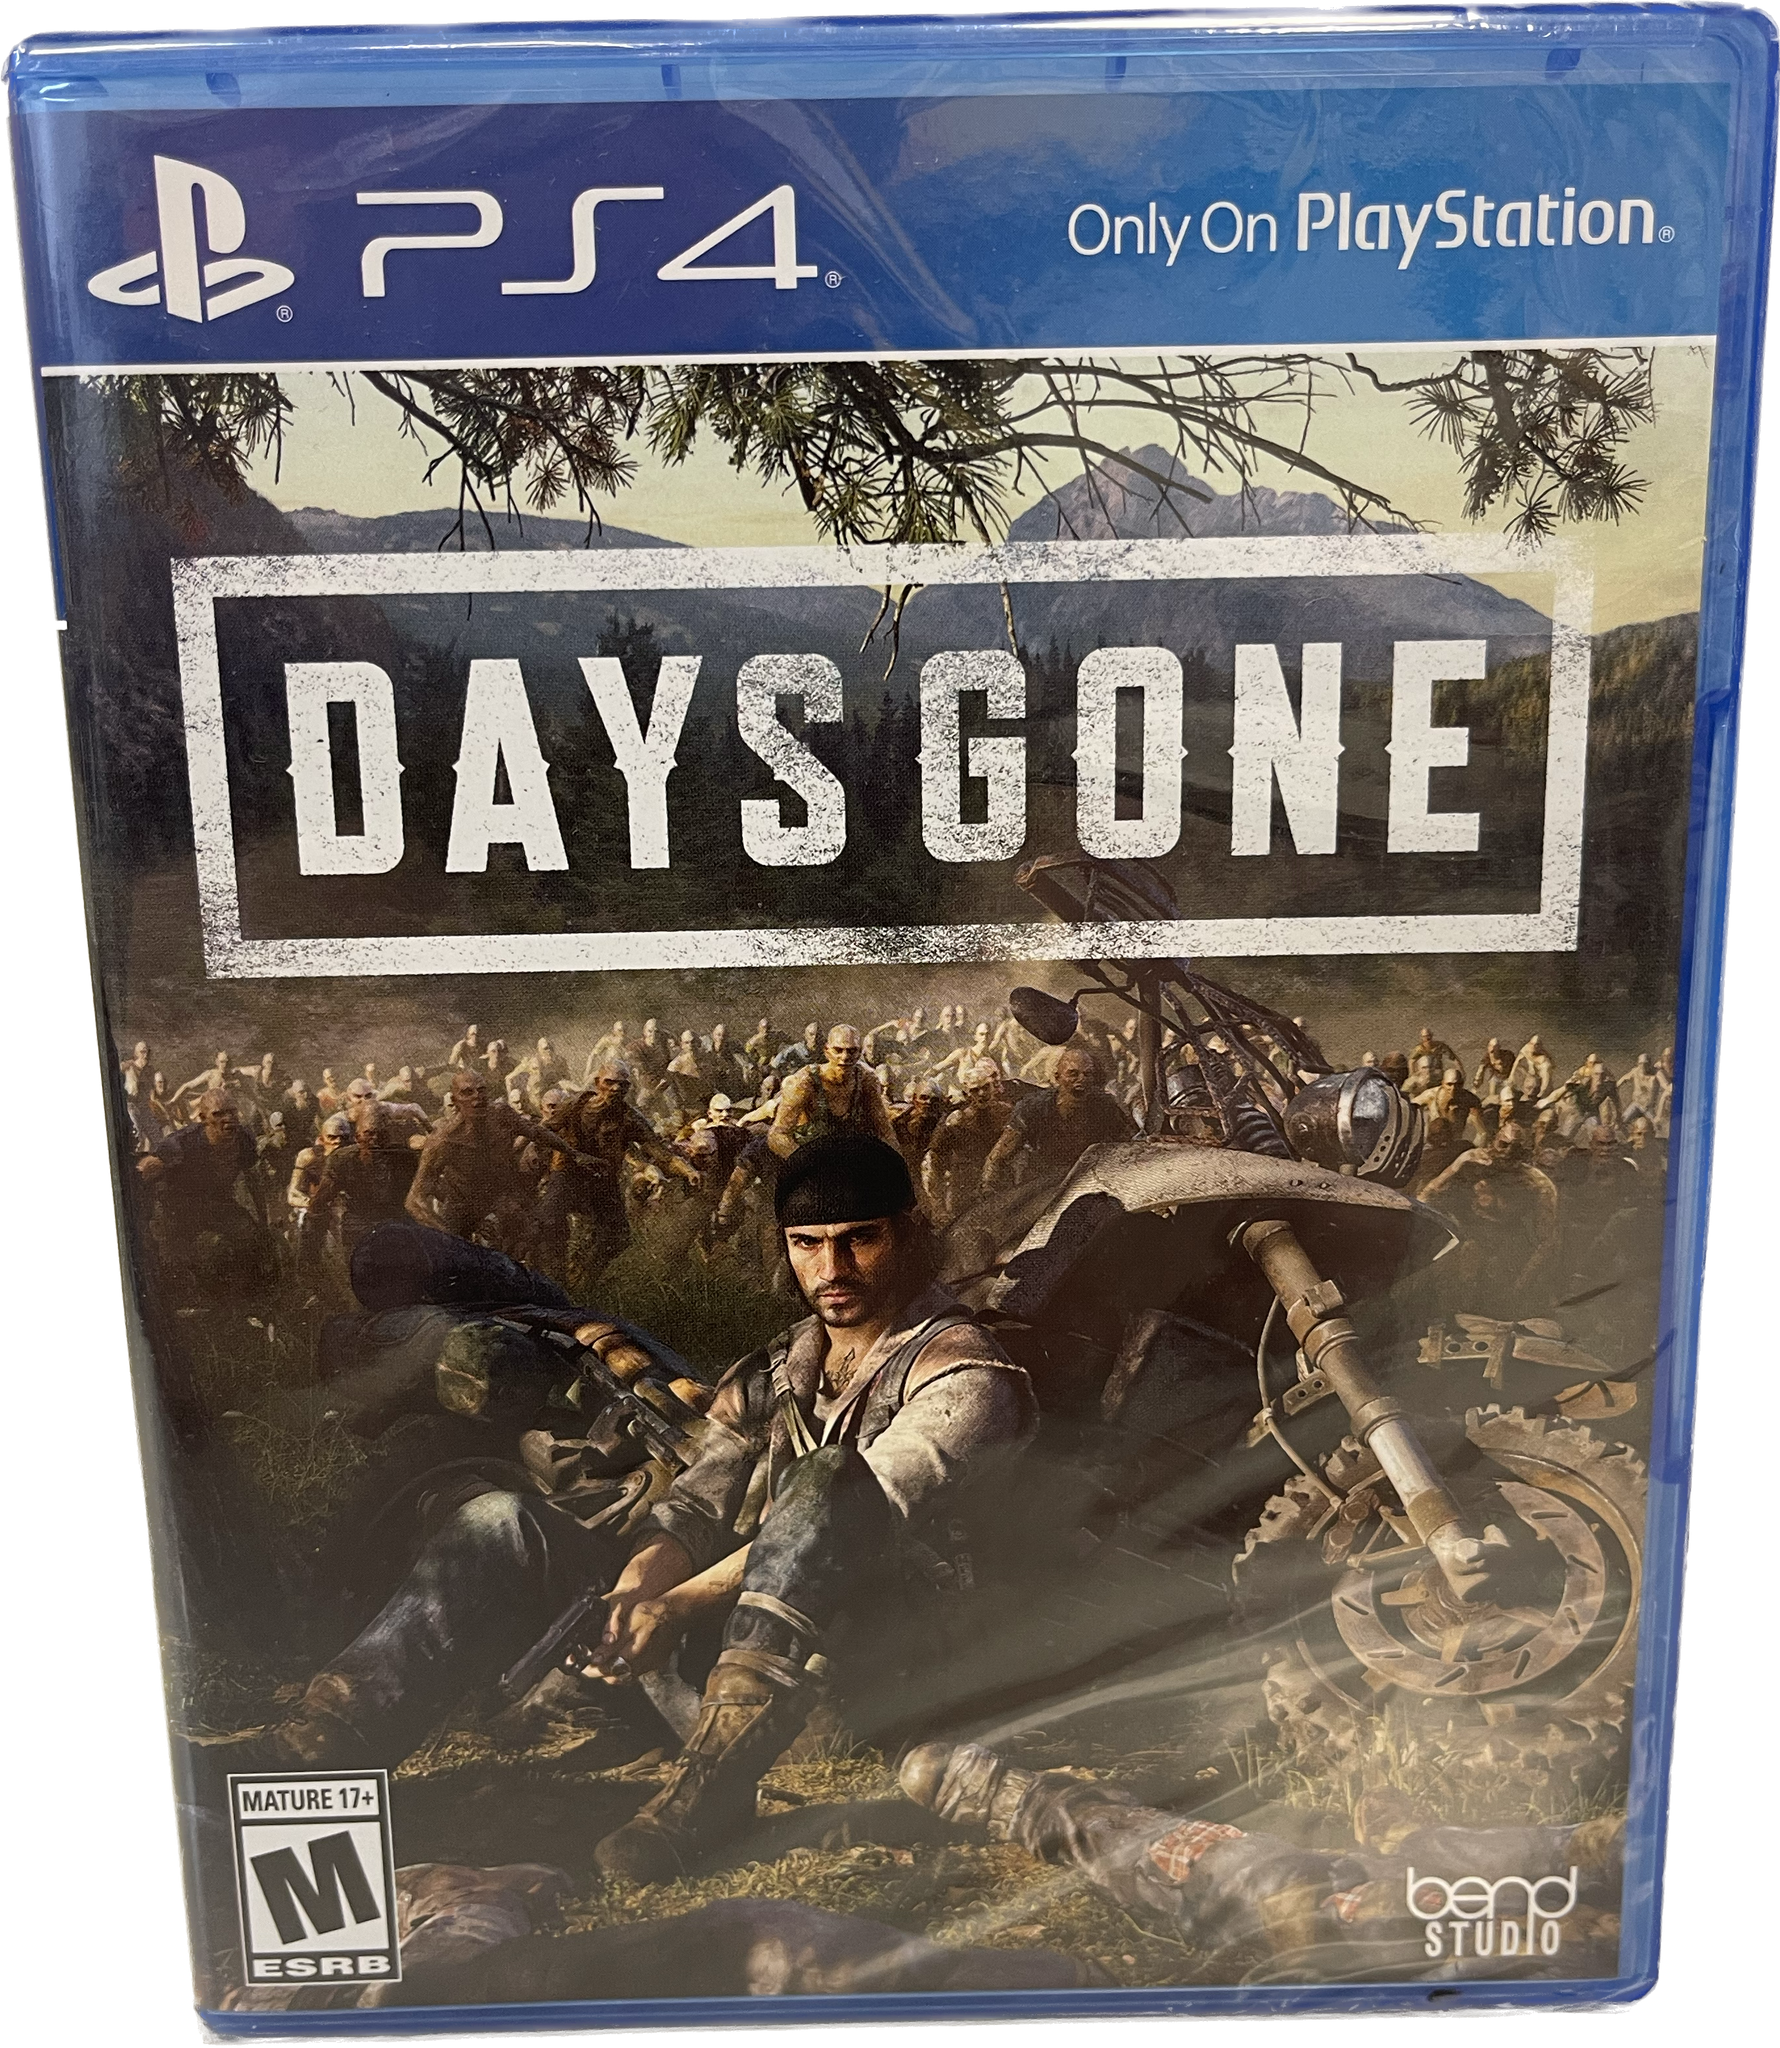 Playstation 4 Days Gone New In Box Sealed PS4